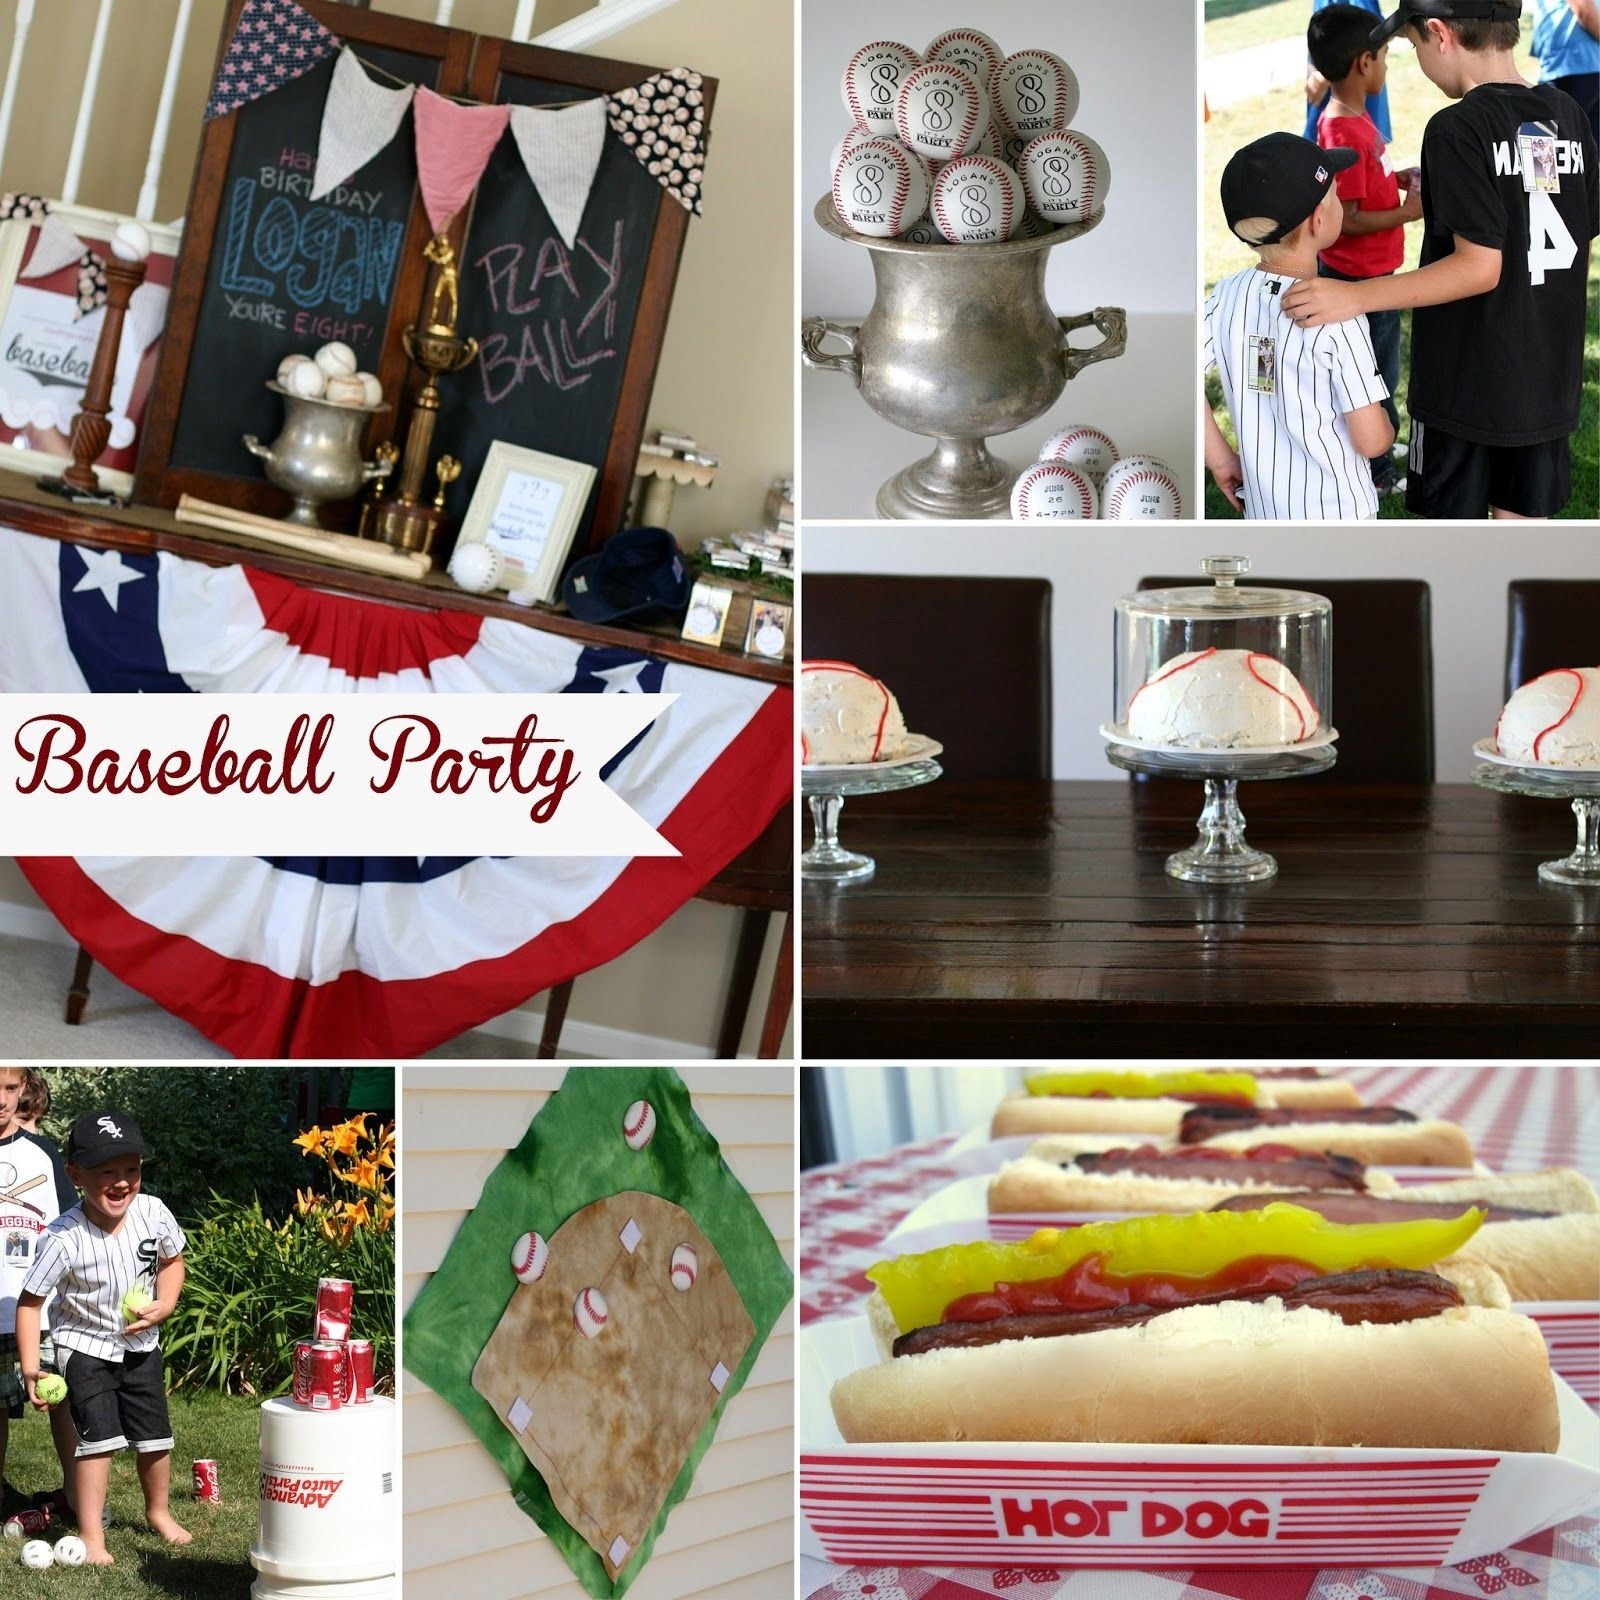 10 Spectacular Party Ideas For 8 Year Old Boy baseball birthday party for 8 year old boys birthday party 2022